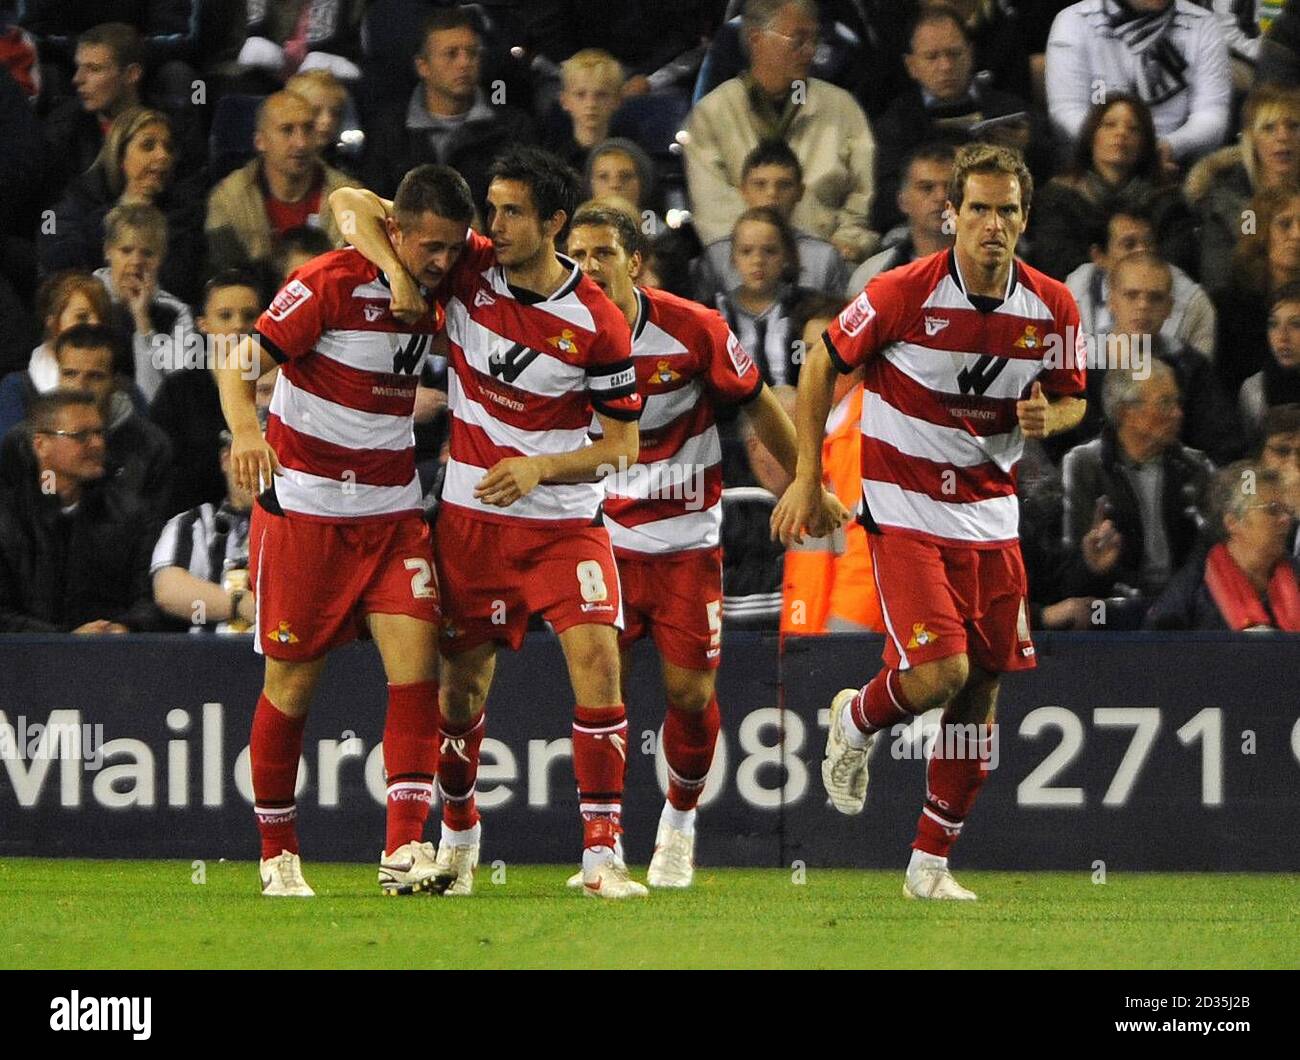 Doncaster Rovers' Waide Fairhurst (left) is congratulated by his team mates after scoring the opening goal of the game during a Coca-Cola Championship match at The Hawthorns, West Bromwich. Stock Photo